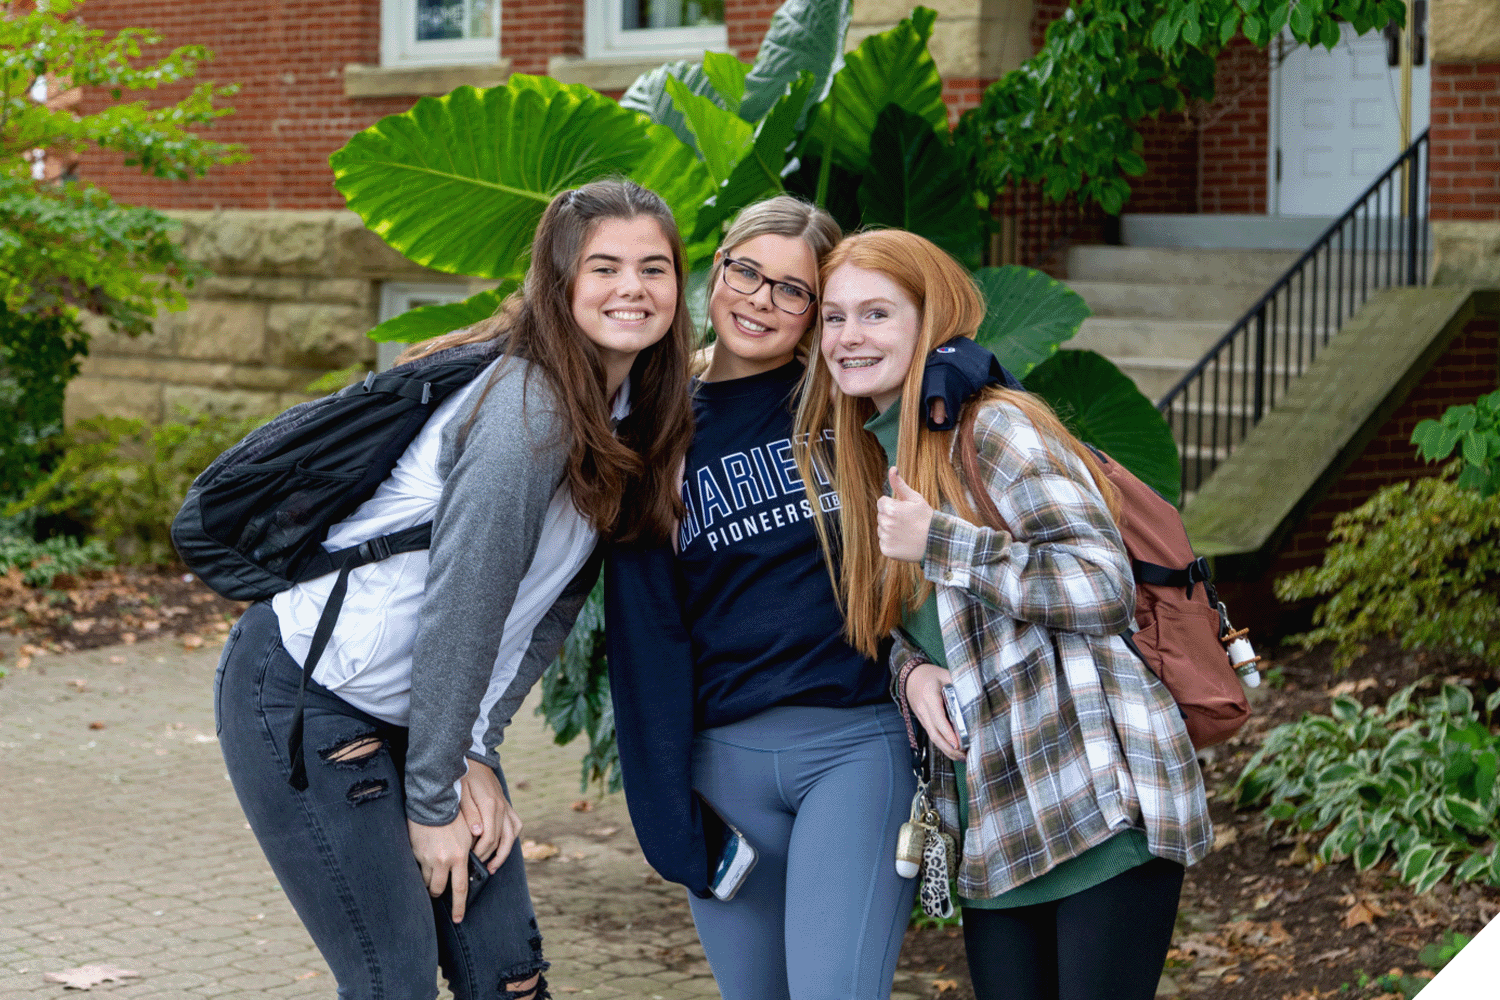 Three Marietta College students pose for a photo outside of Andrews Hall